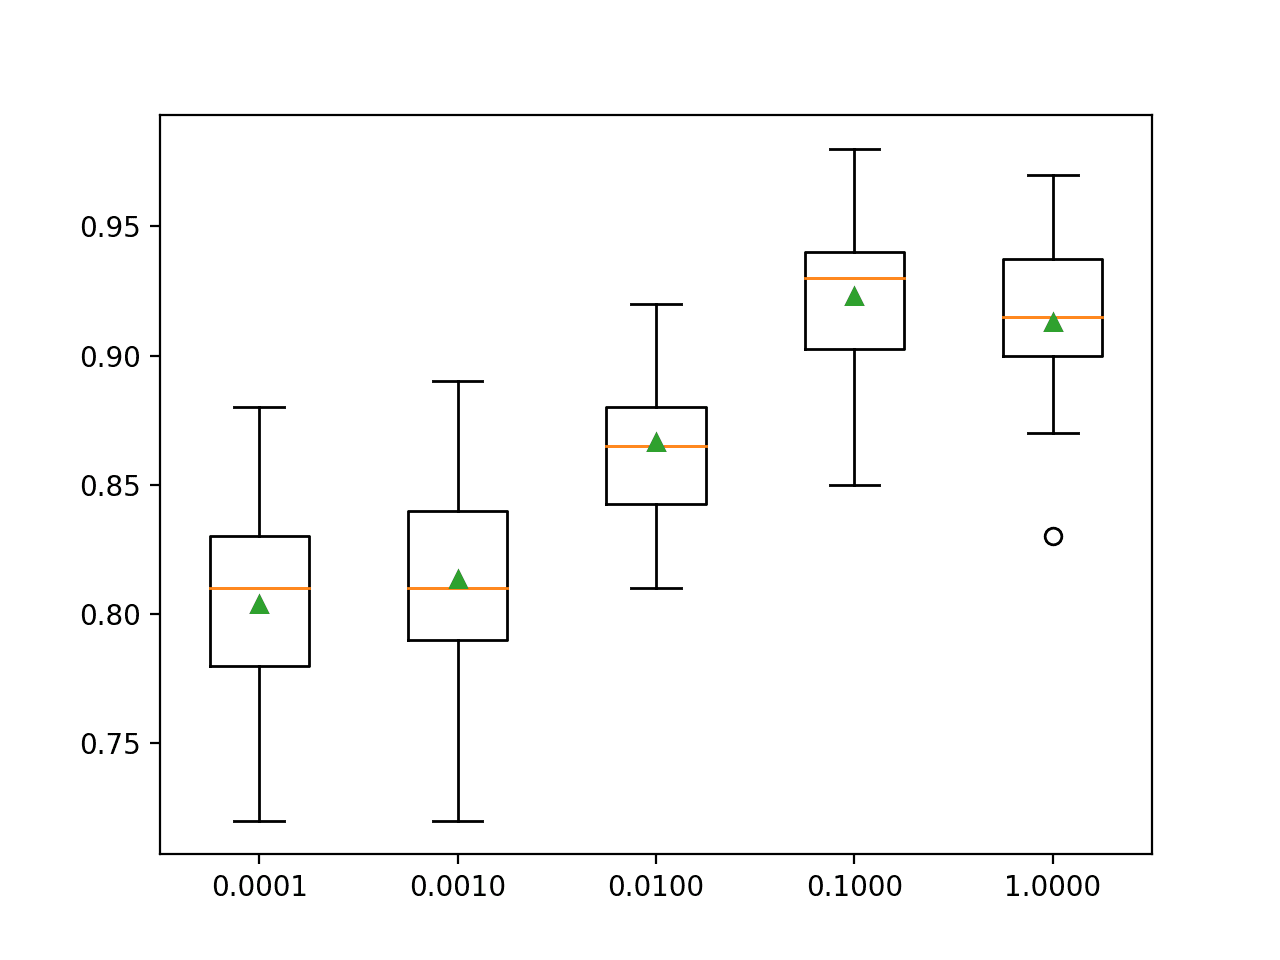 Box Plot of XGBoost Learning Rate vs. Classification Accuracy